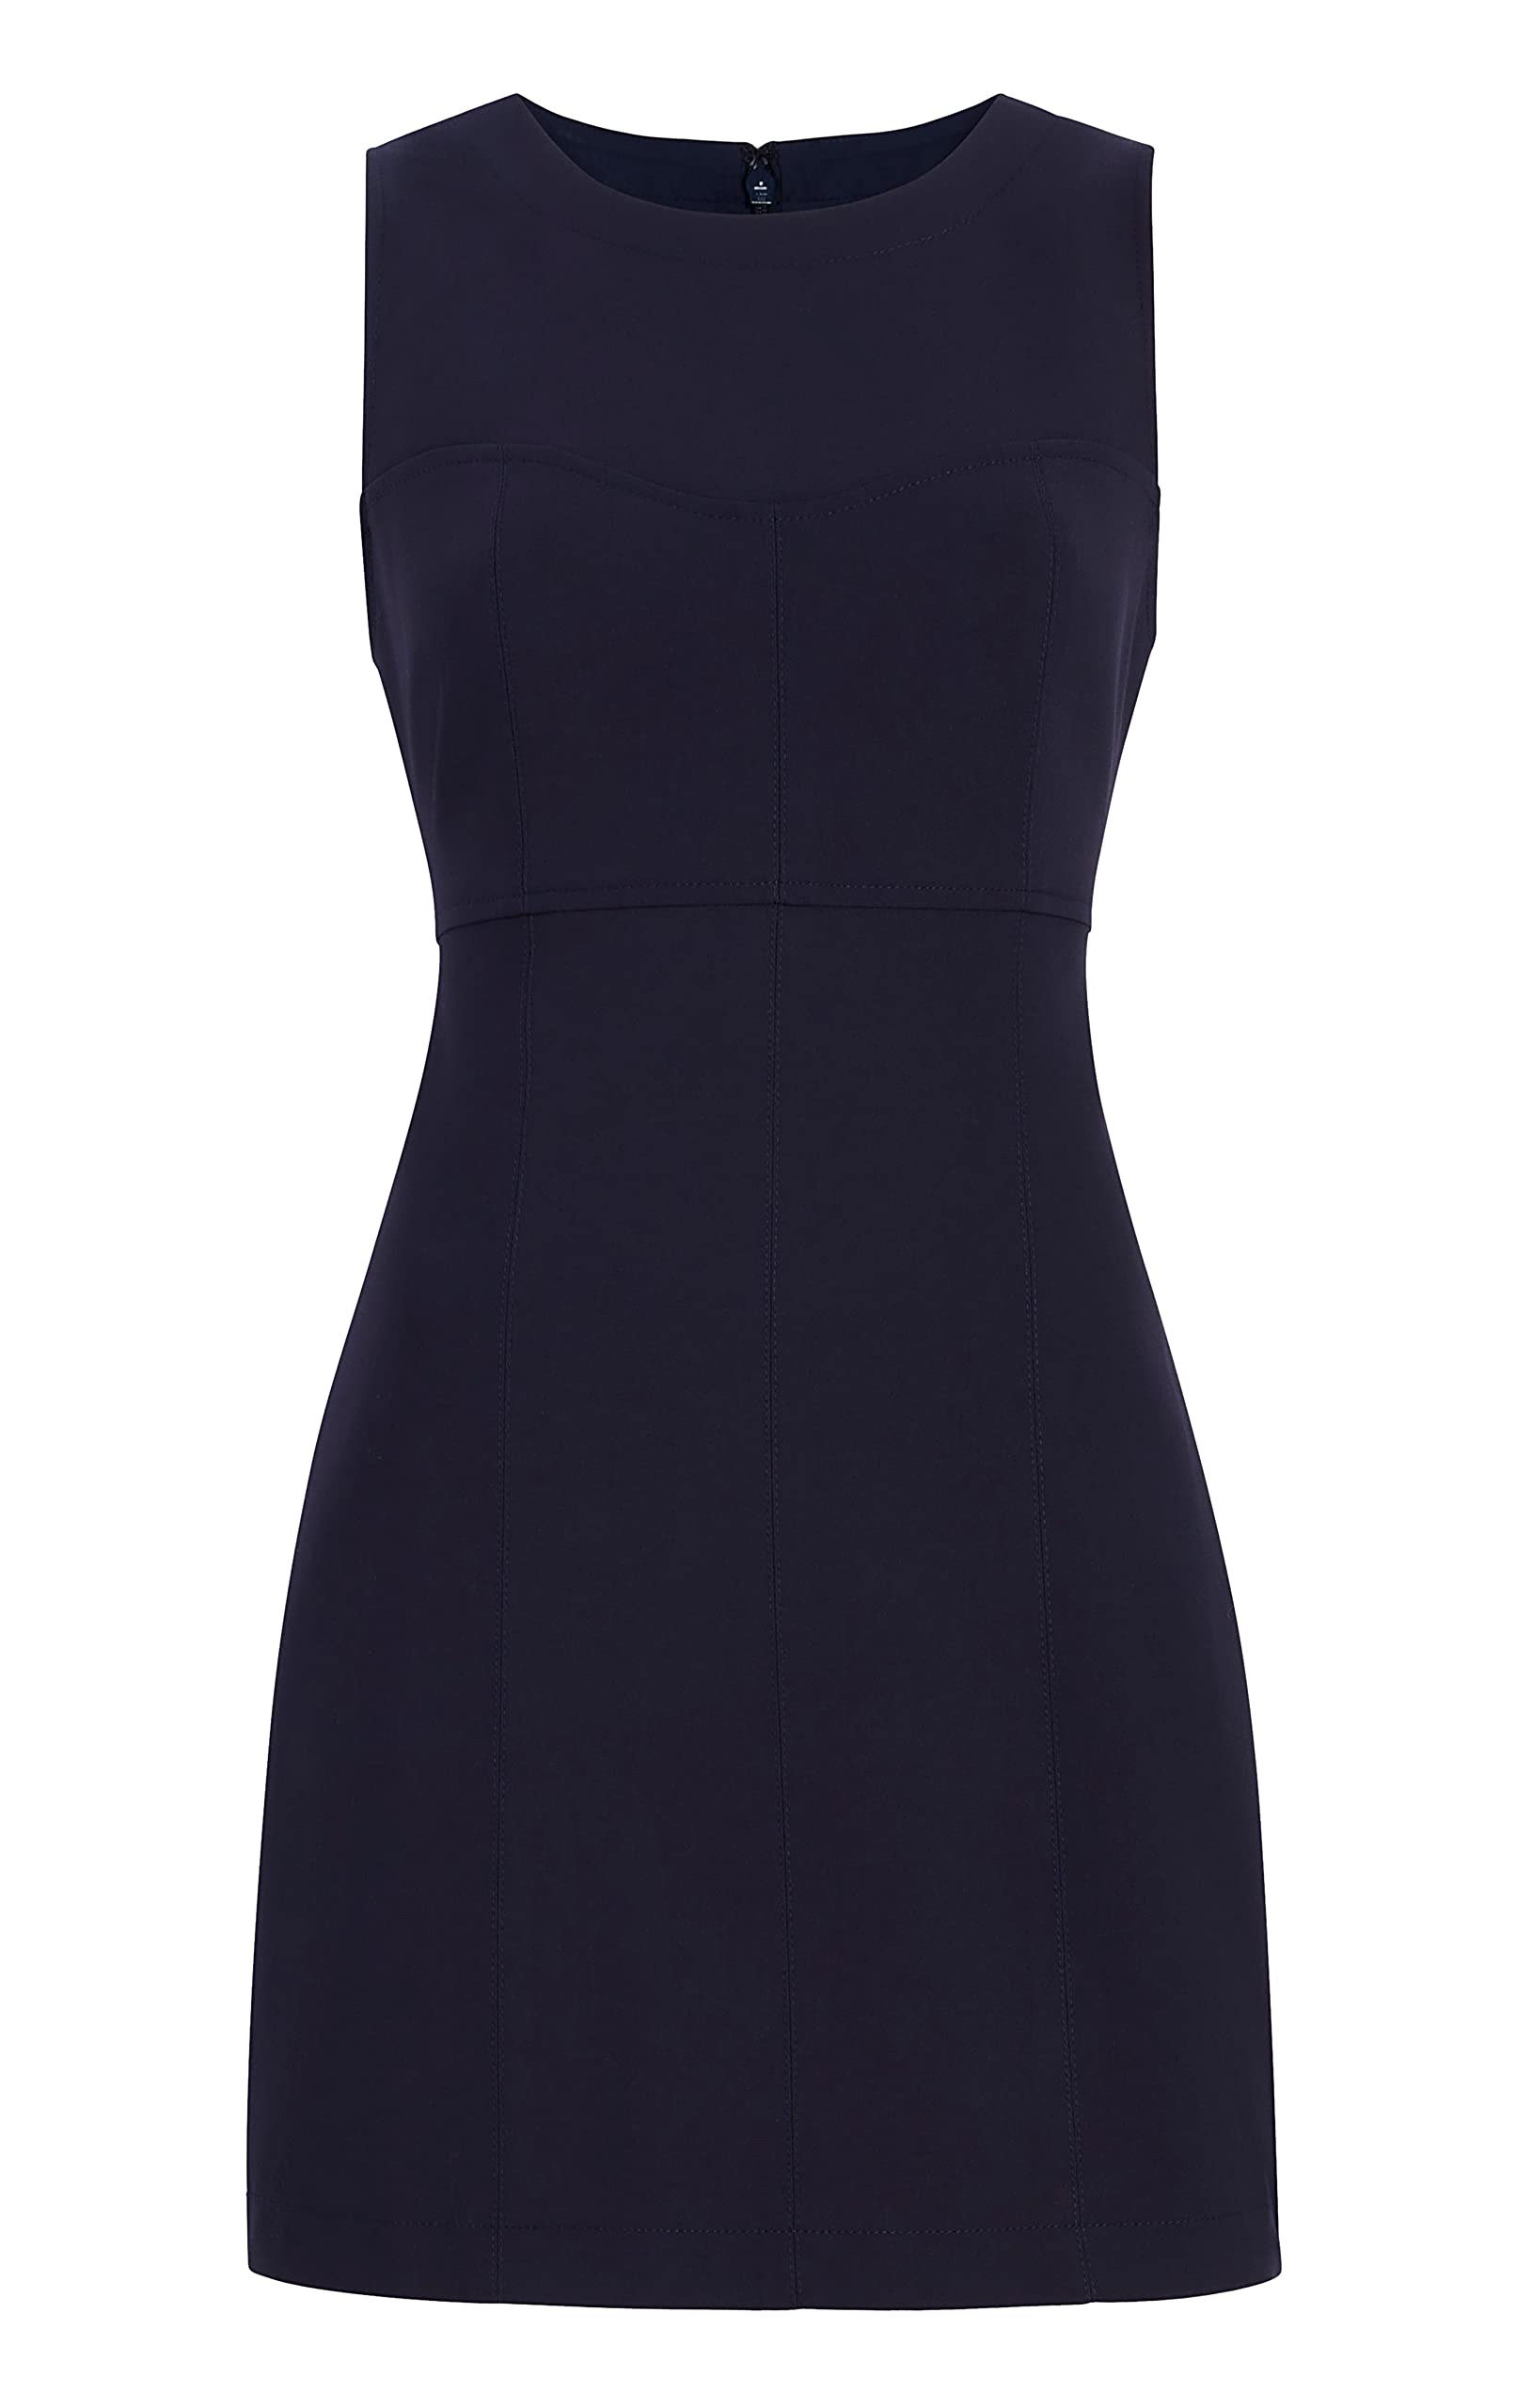 LIKELY Women's Kendrick Cocktail Dress